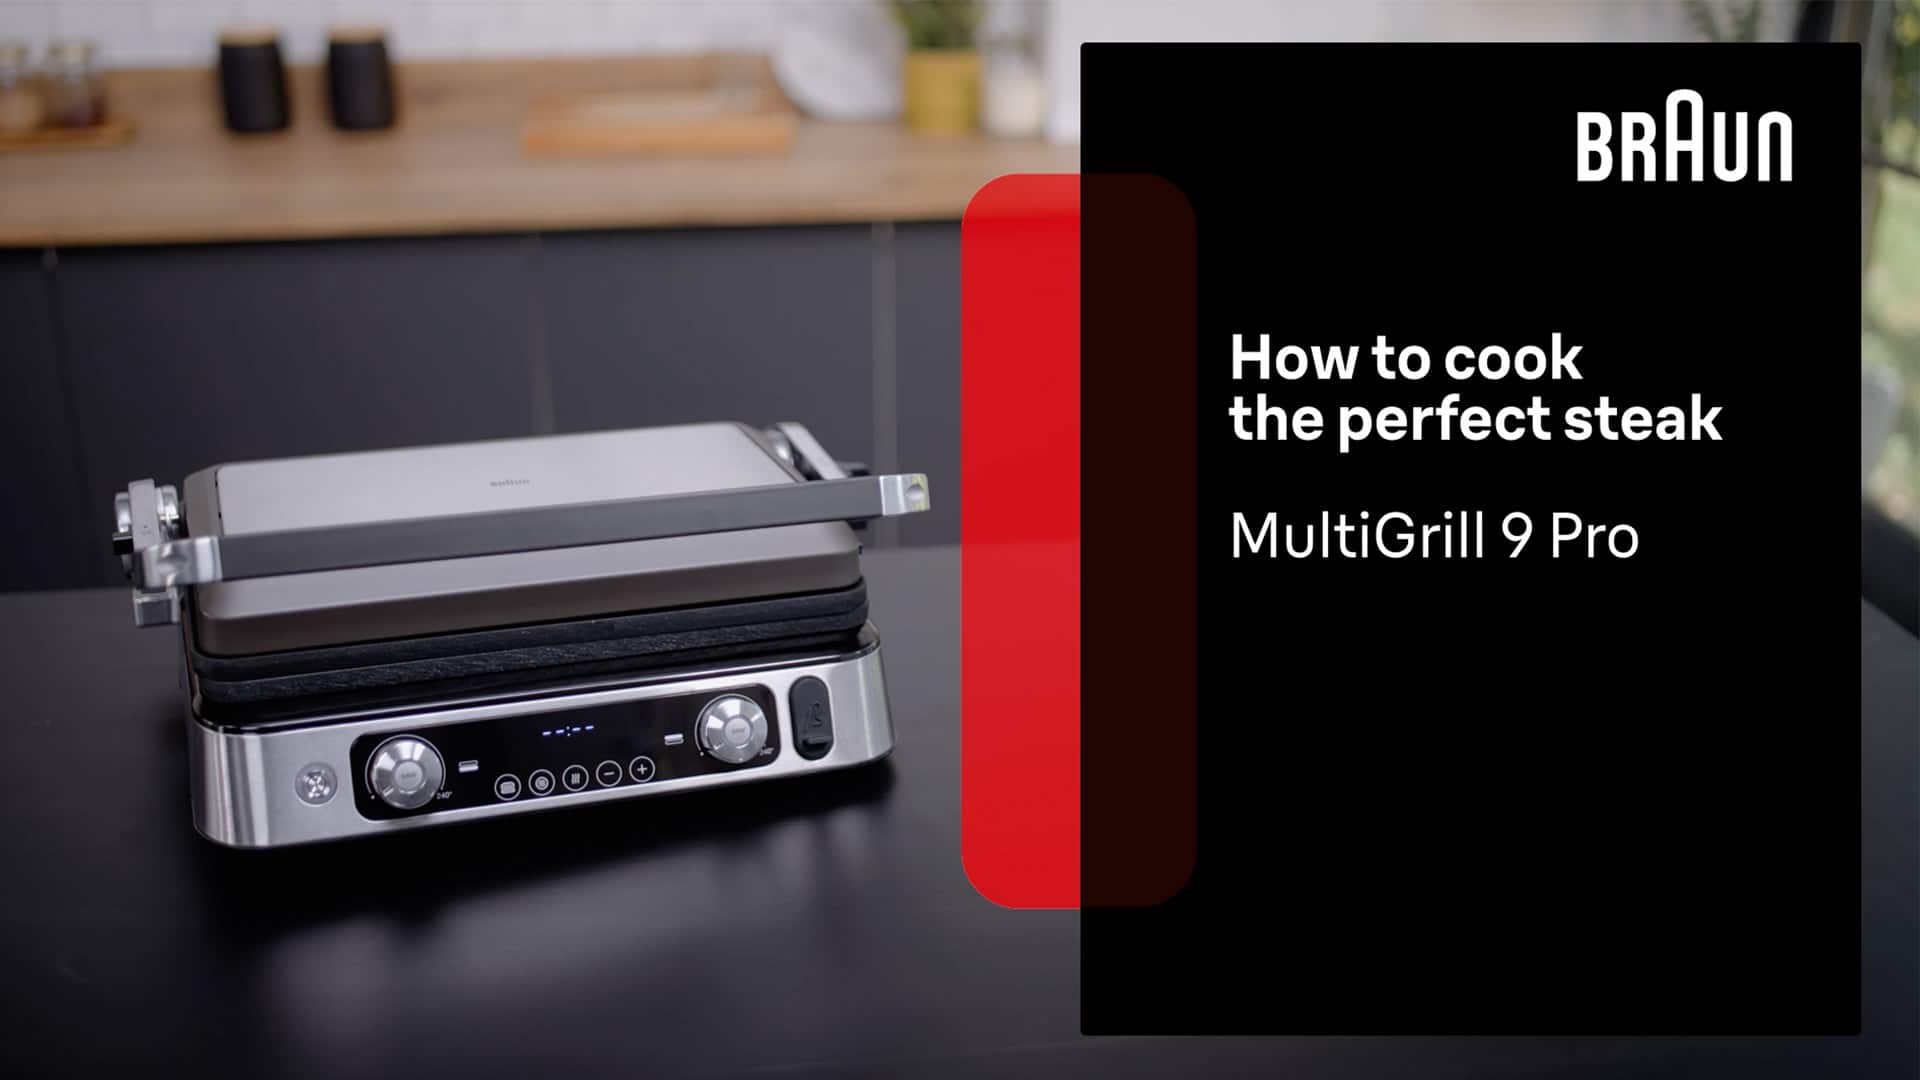 Braun MultiGrill 9 Pro | How to Cook the Perfect Steak